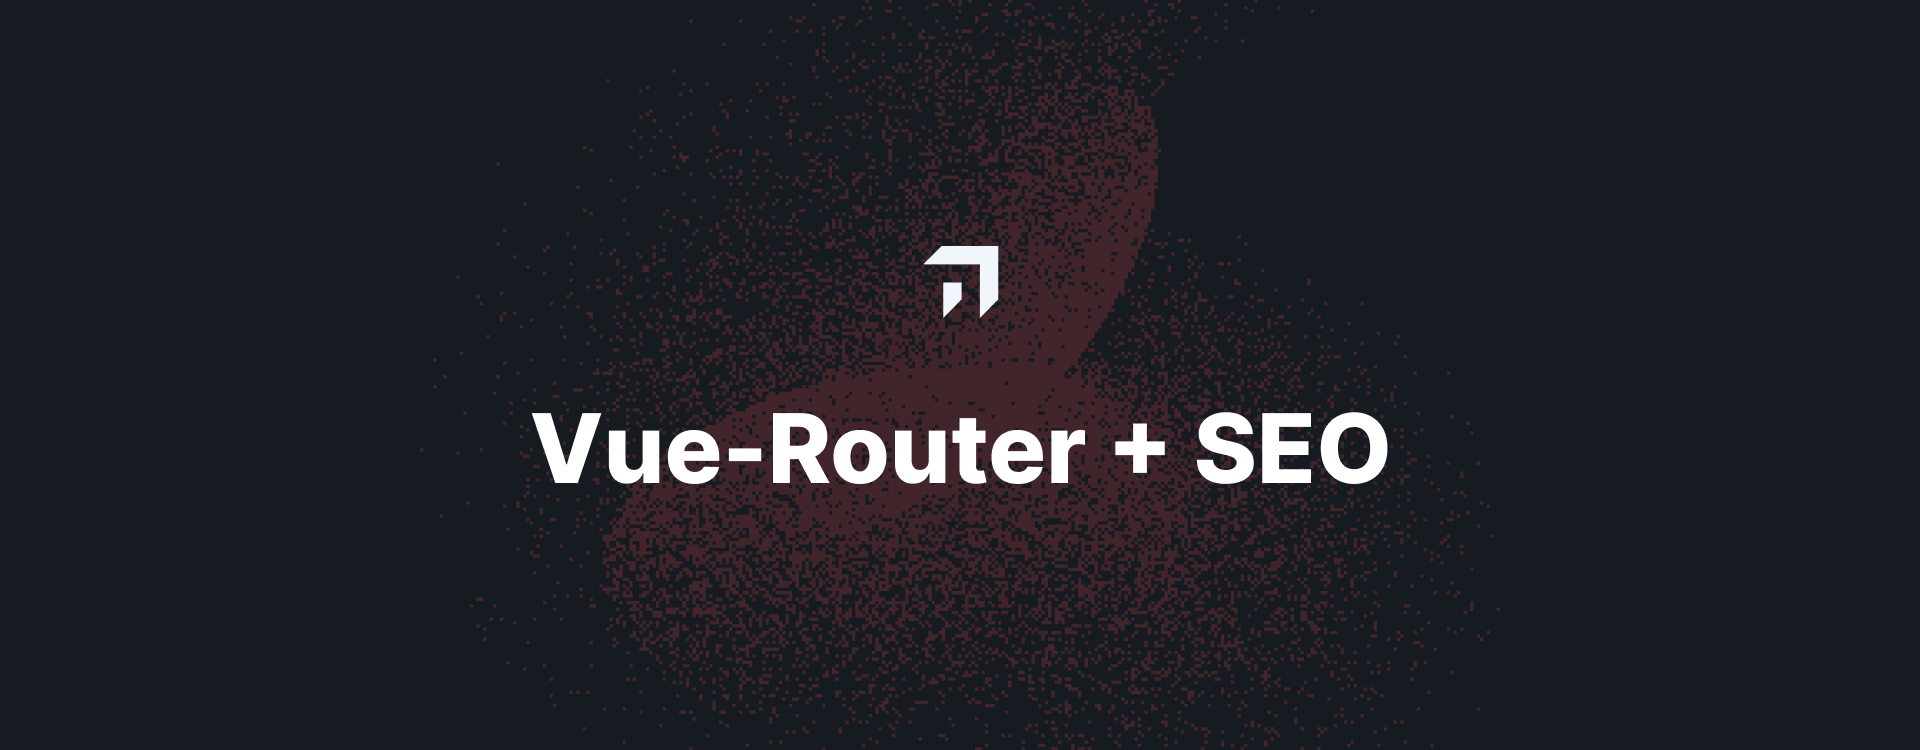 Hero image for Vue-Router + SEO